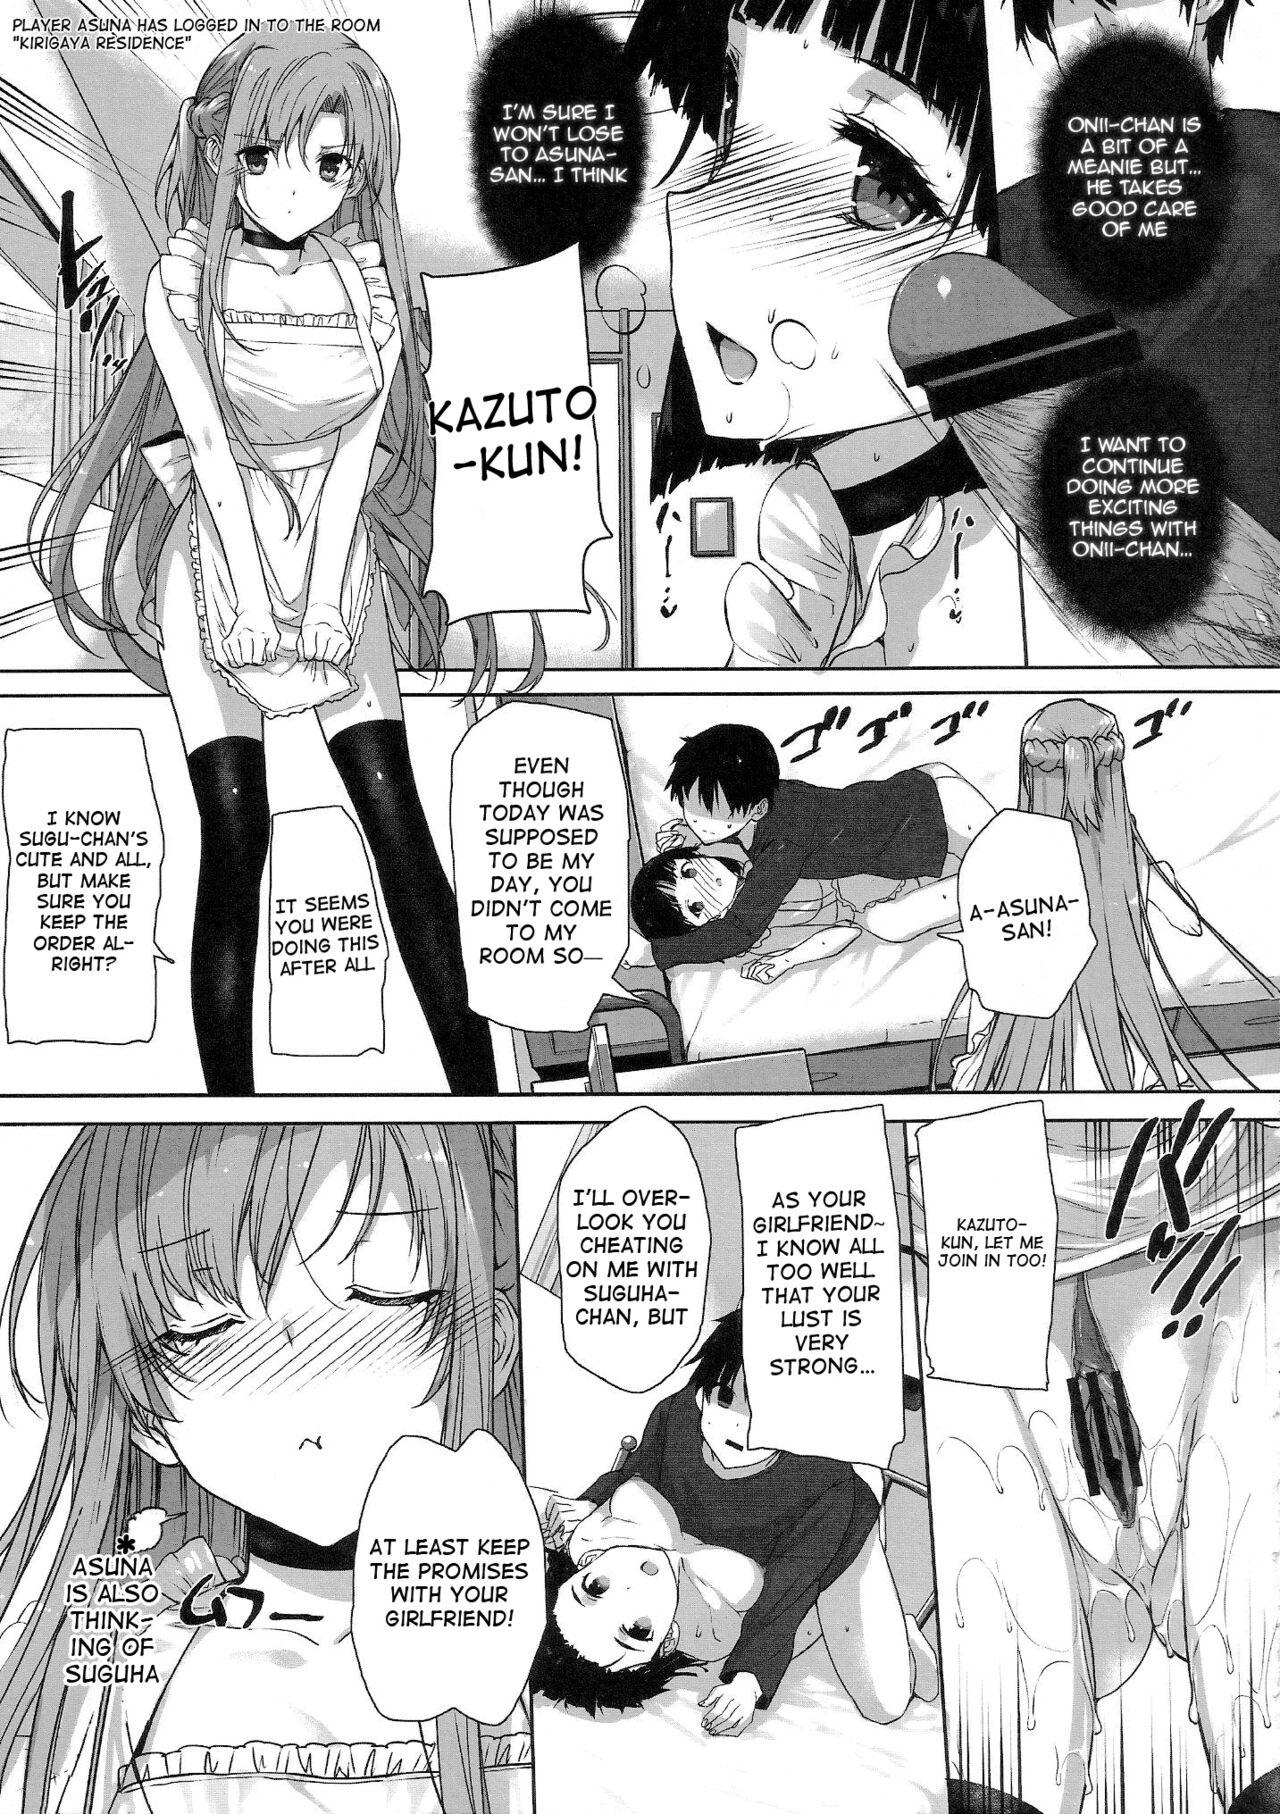 Baile Inran SWORD ART SISTER x LOVER | Perverted Sword Art - Sister x Lover - Sword art online Dick Sucking - Page 8